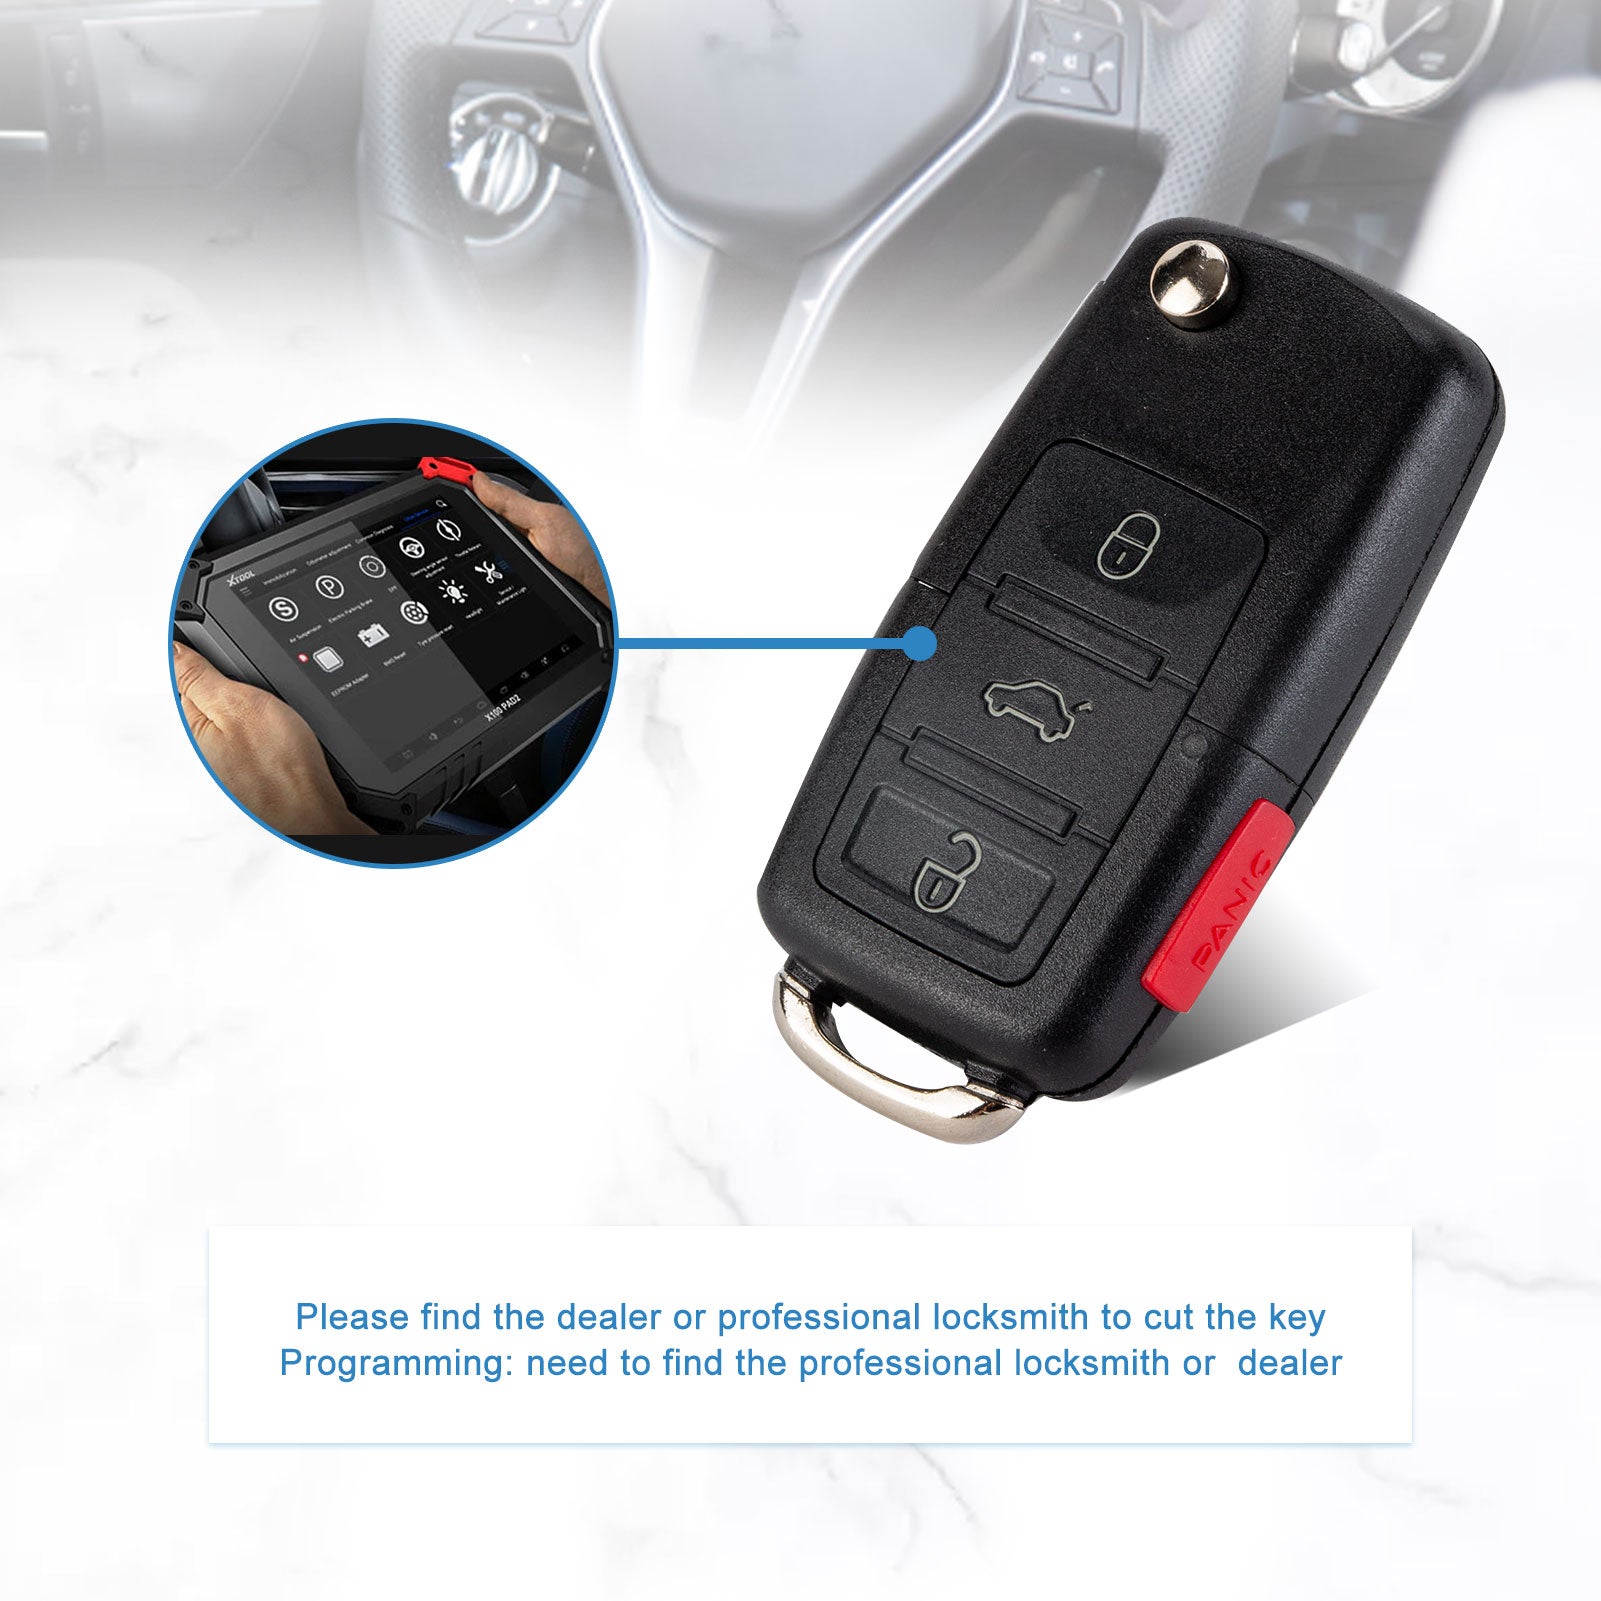 Keyless Entry Remote Replacement for 2002-2006 Beetle 2003-2005 Golf 2002-2005 Passat 2002-2004 Jetta 315MHZ NBG735868T  KR-V4SA